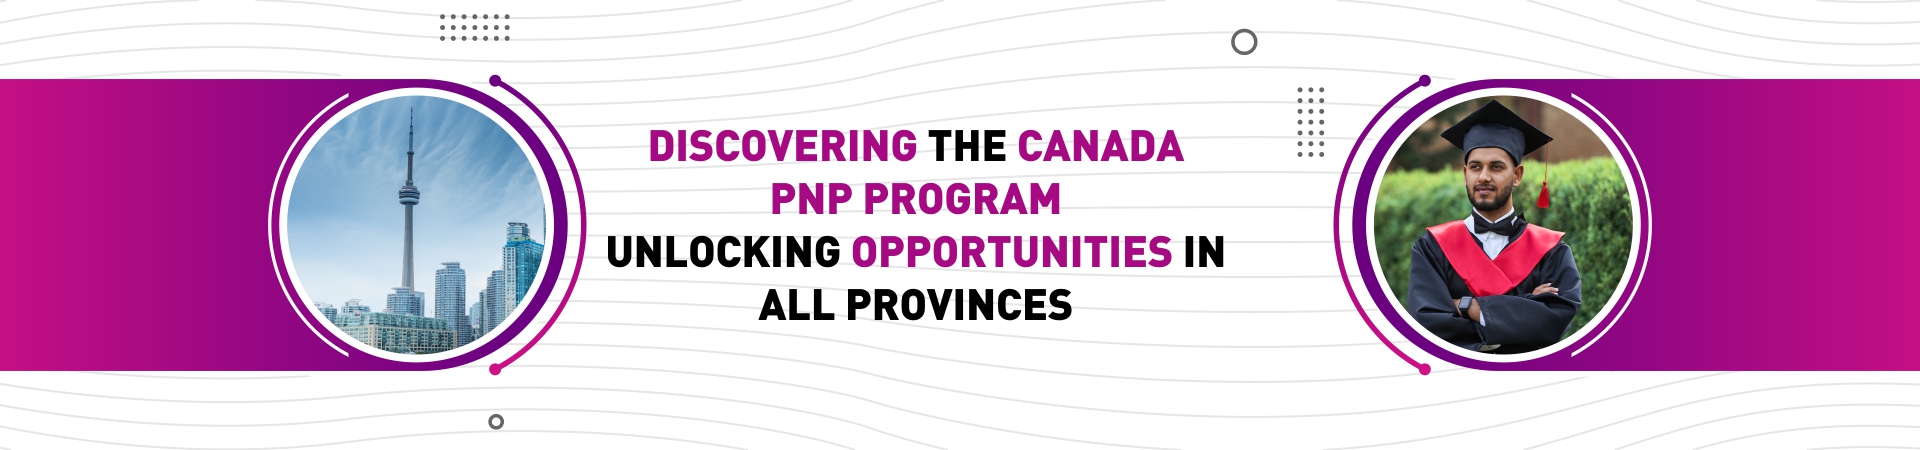 Discovering the Canada PNP Program: Unlocking Opportunities in All Provinces